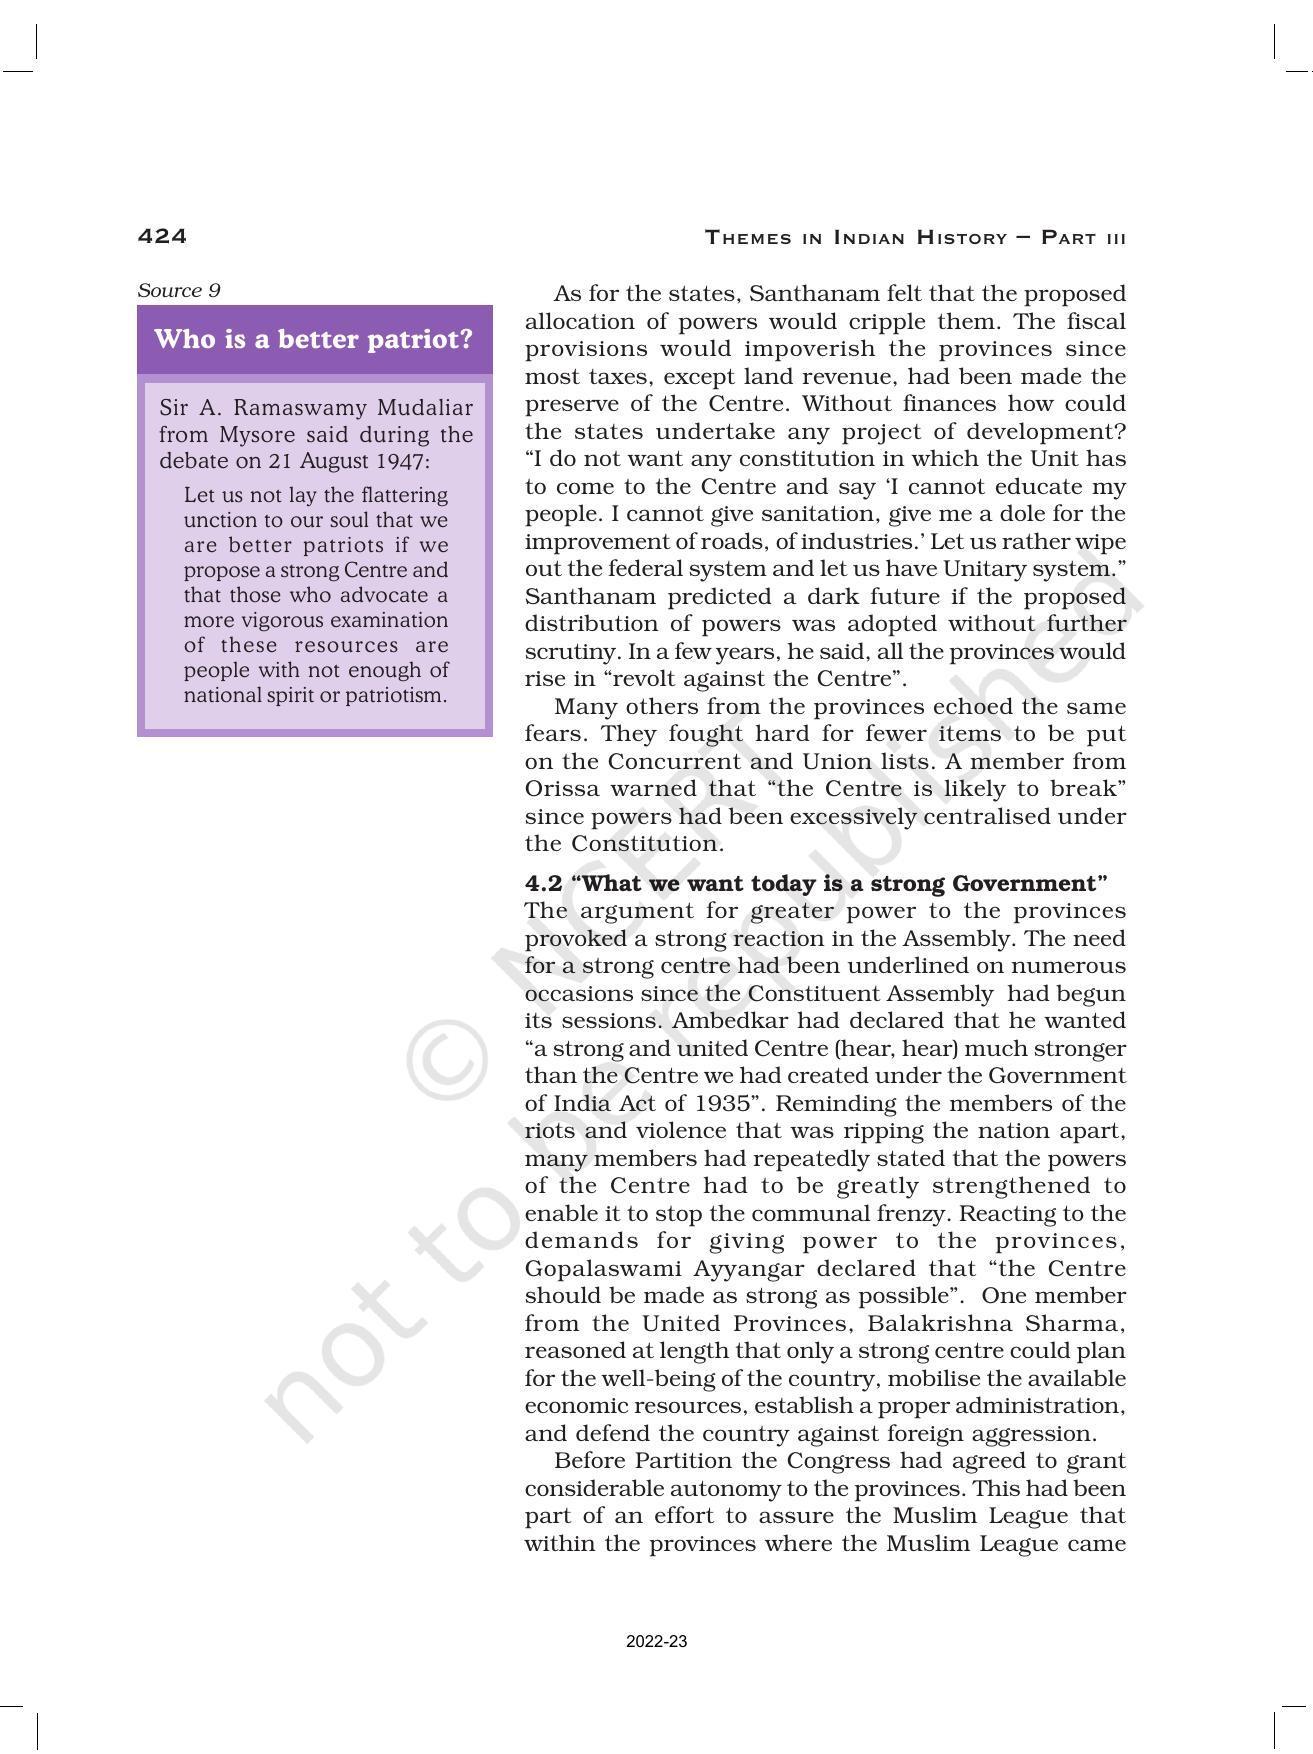 NCERT Book for Class 12 History (Part-III) Chapter 15 Framing and the Constitution - Page 20